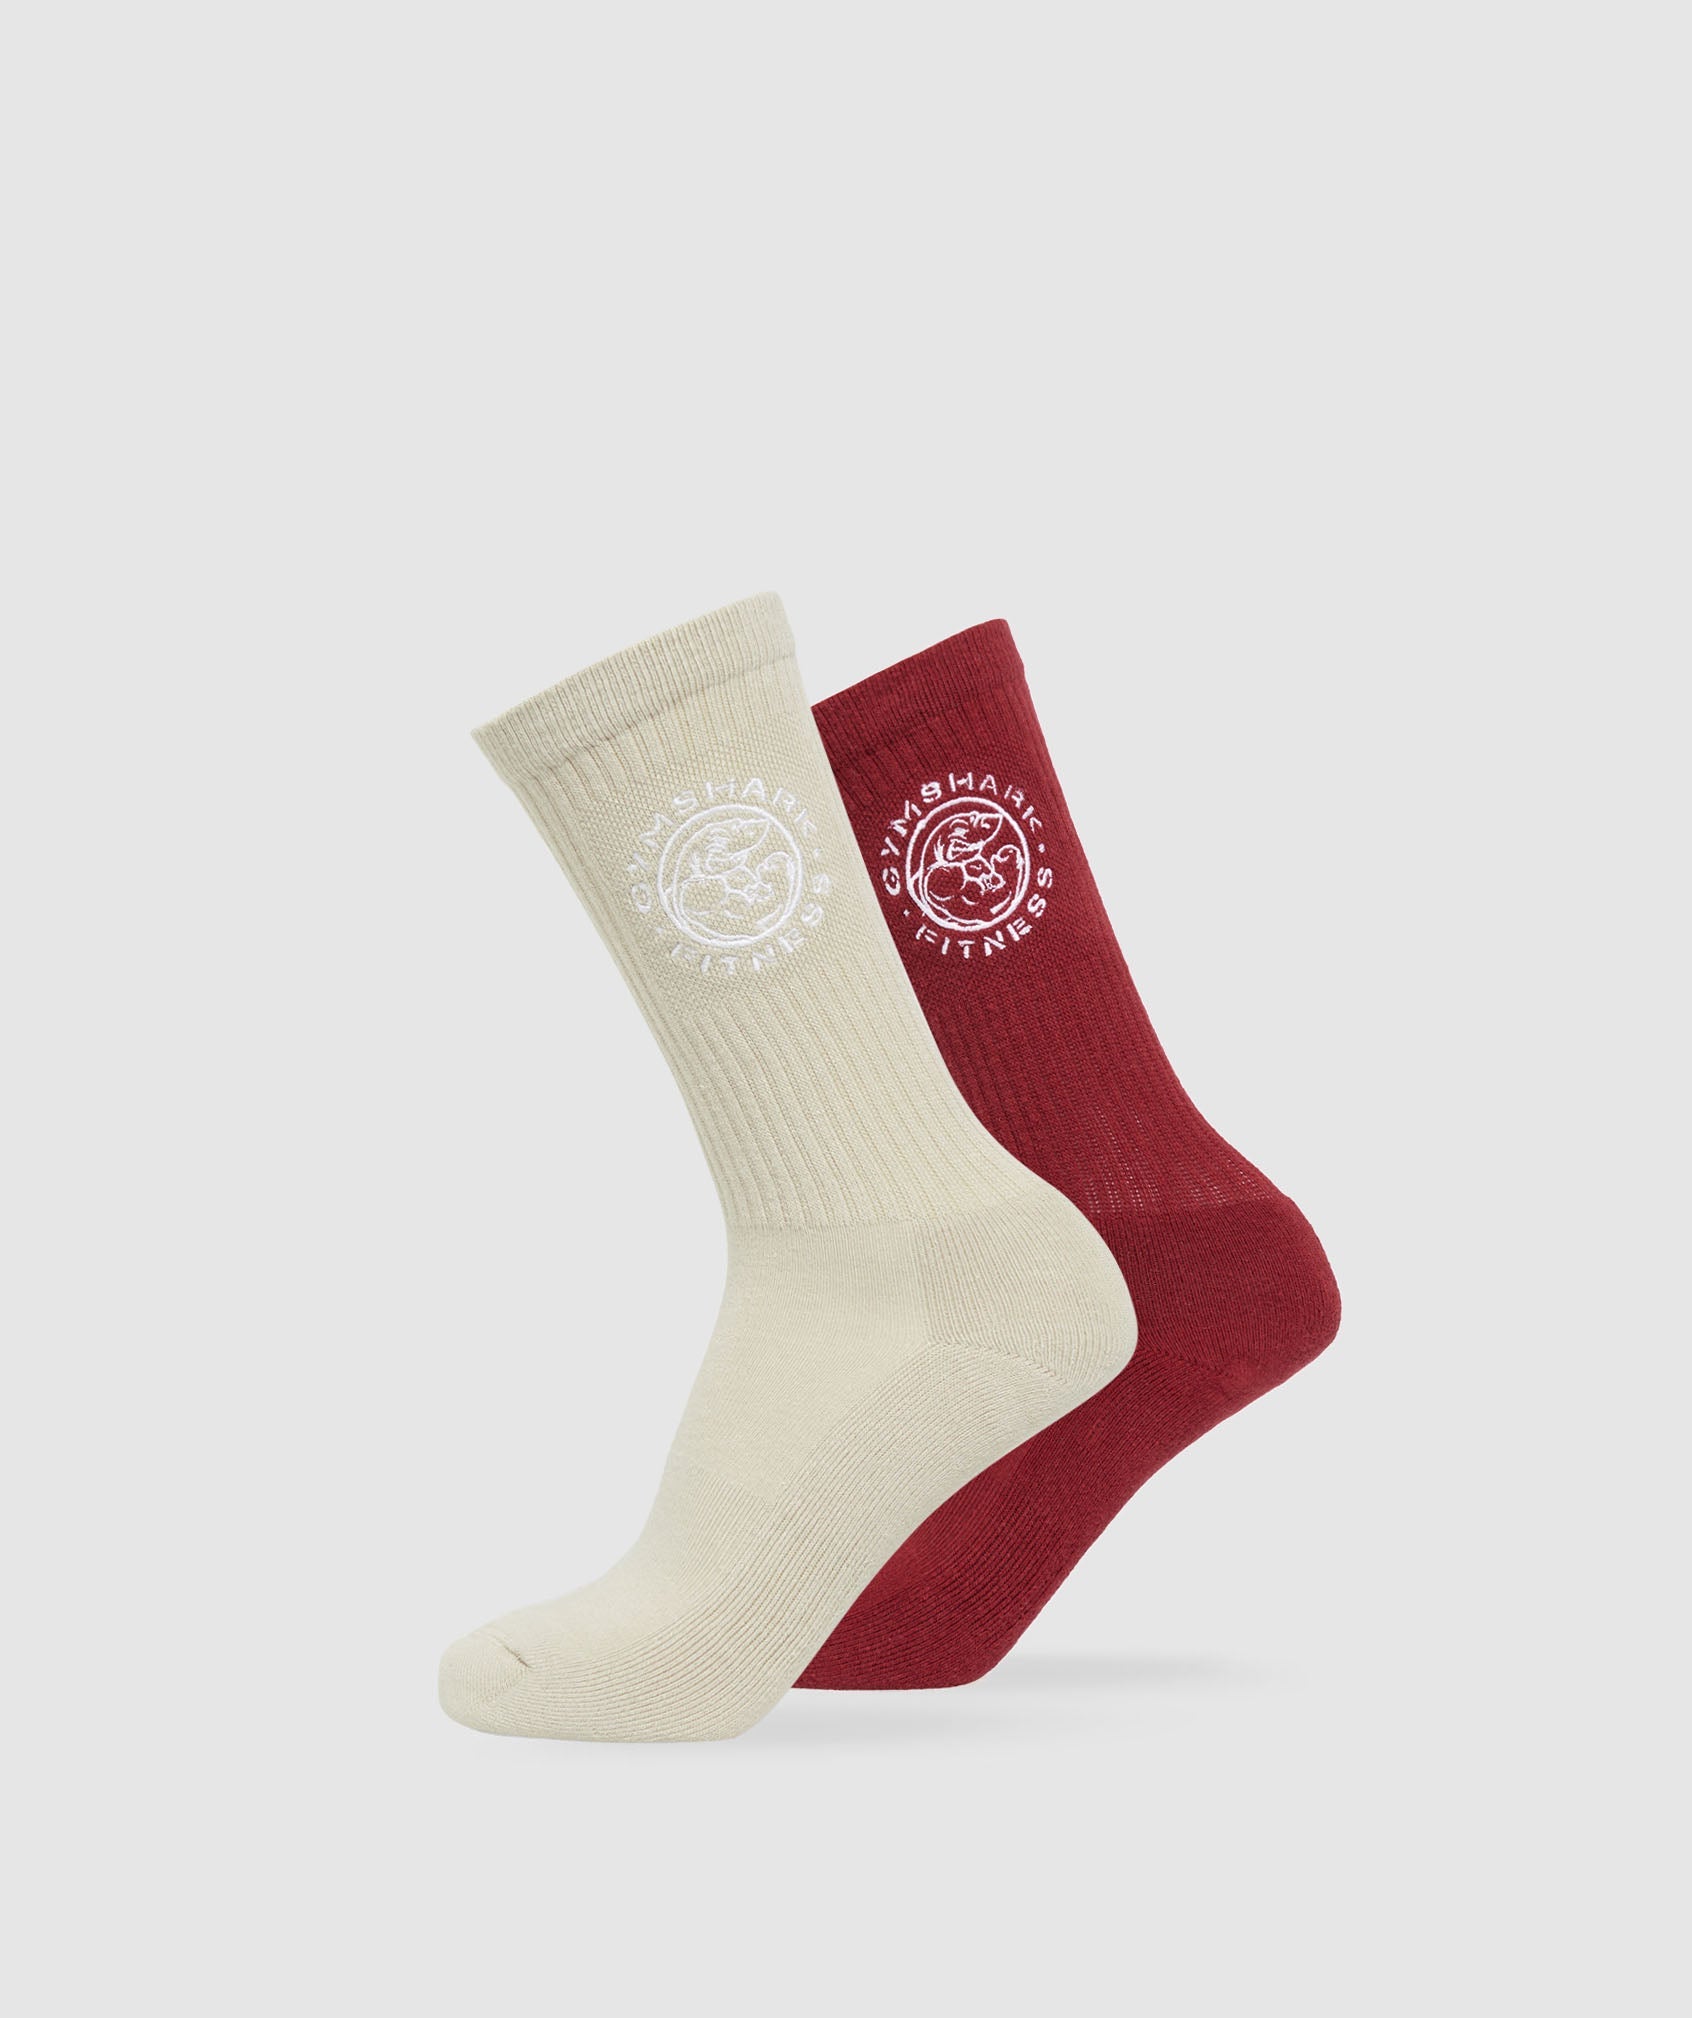 Legacy Crew Socks 2pk in Pebble Grey/Washed Red ist nicht auf Lager